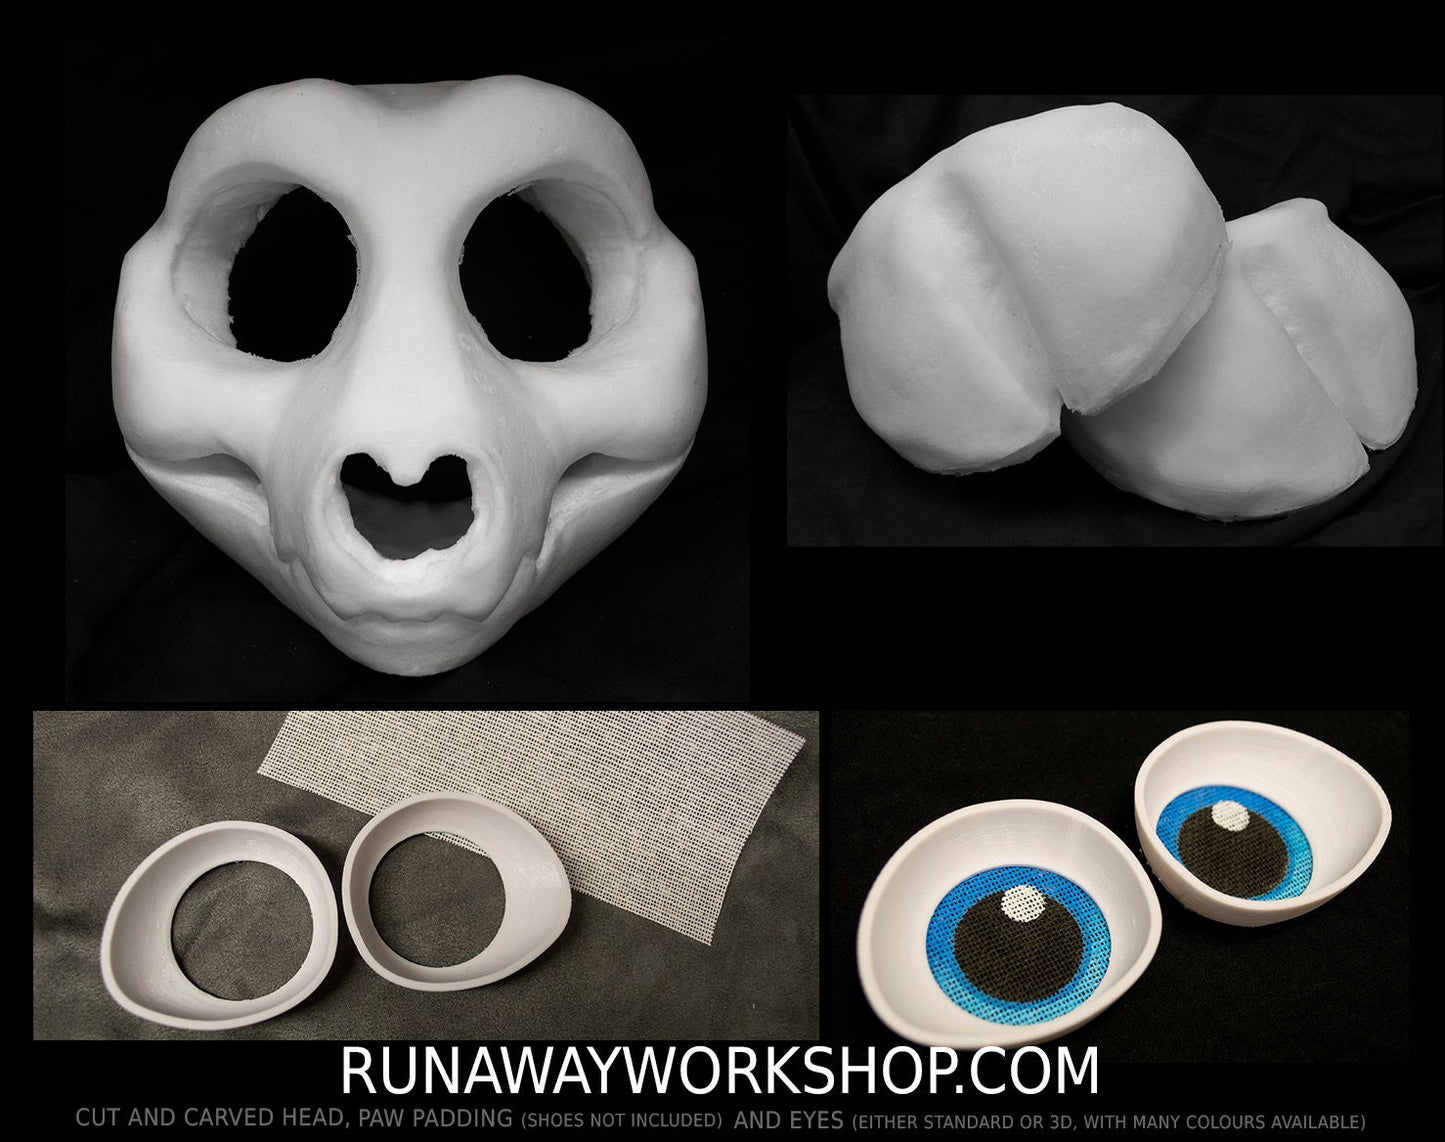 Toony demon skull bundle deal: cut and carved head base, Eyes and Feet padding, for costumes mascots and fursuits.